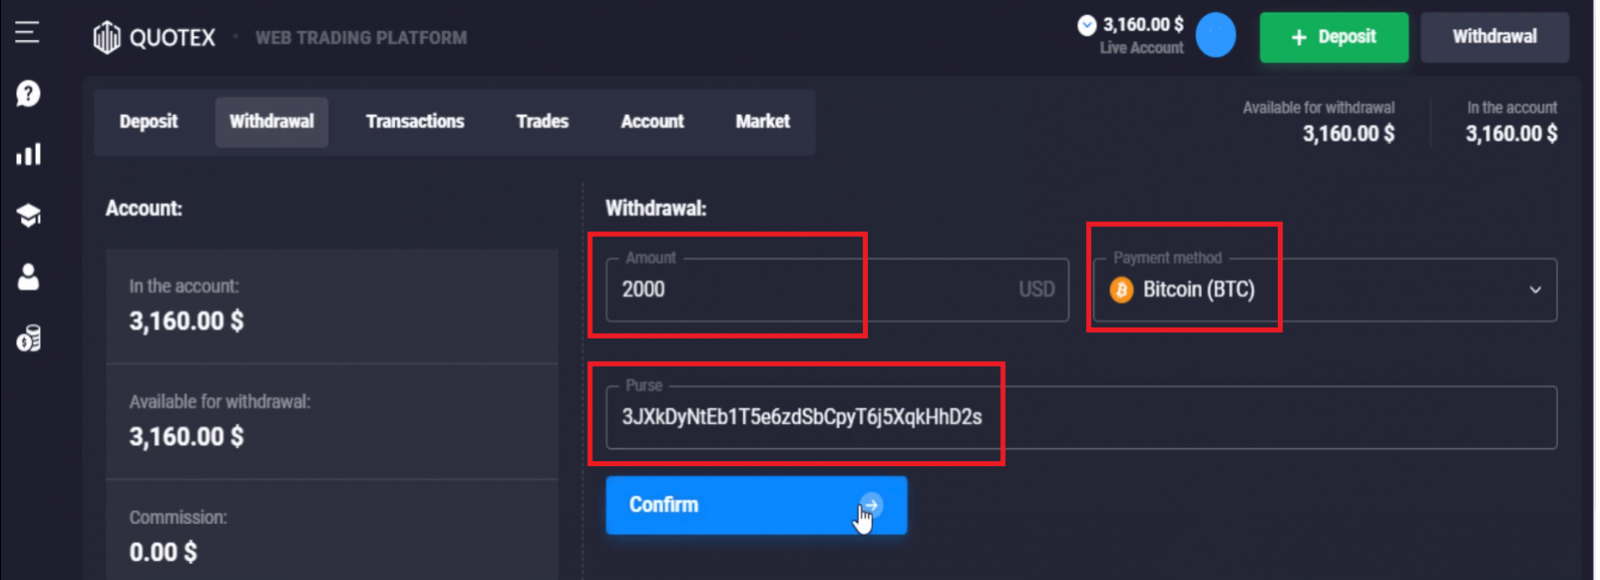 How to Register and Withdraw Money on Quotex